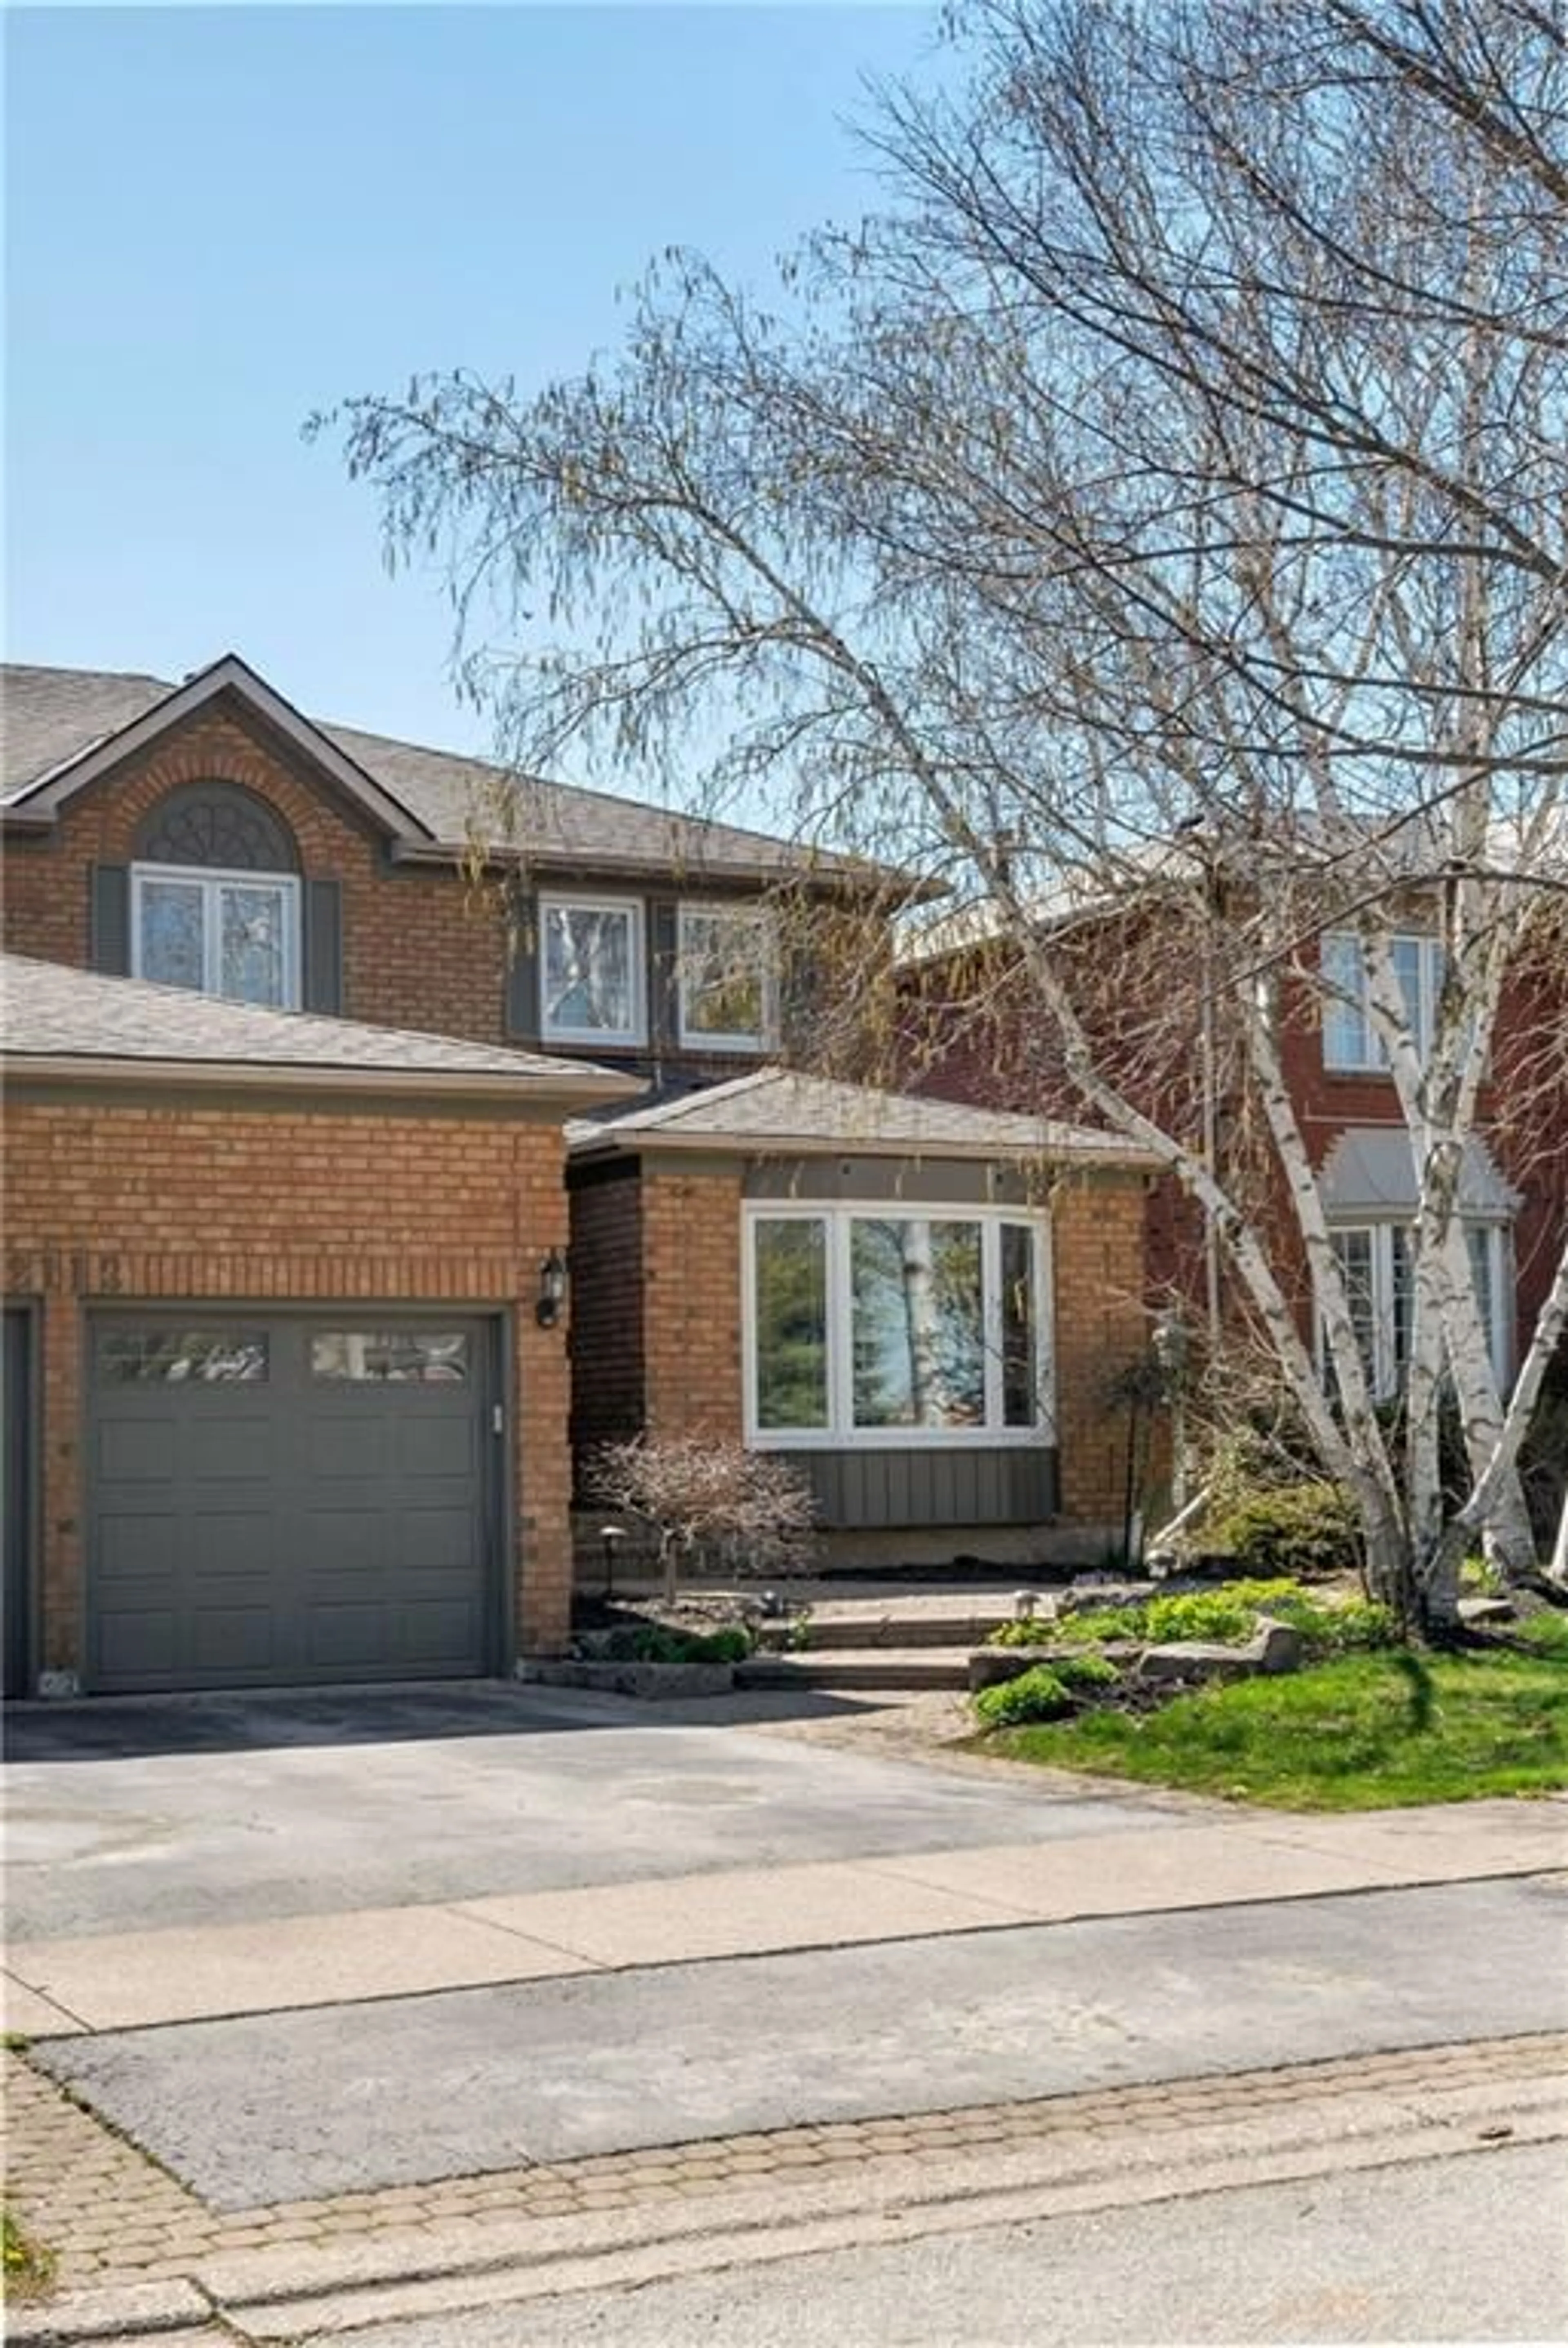 Home with brick exterior material for 2112 Lumberman Lane, Oakville Ontario L6M 2Y9